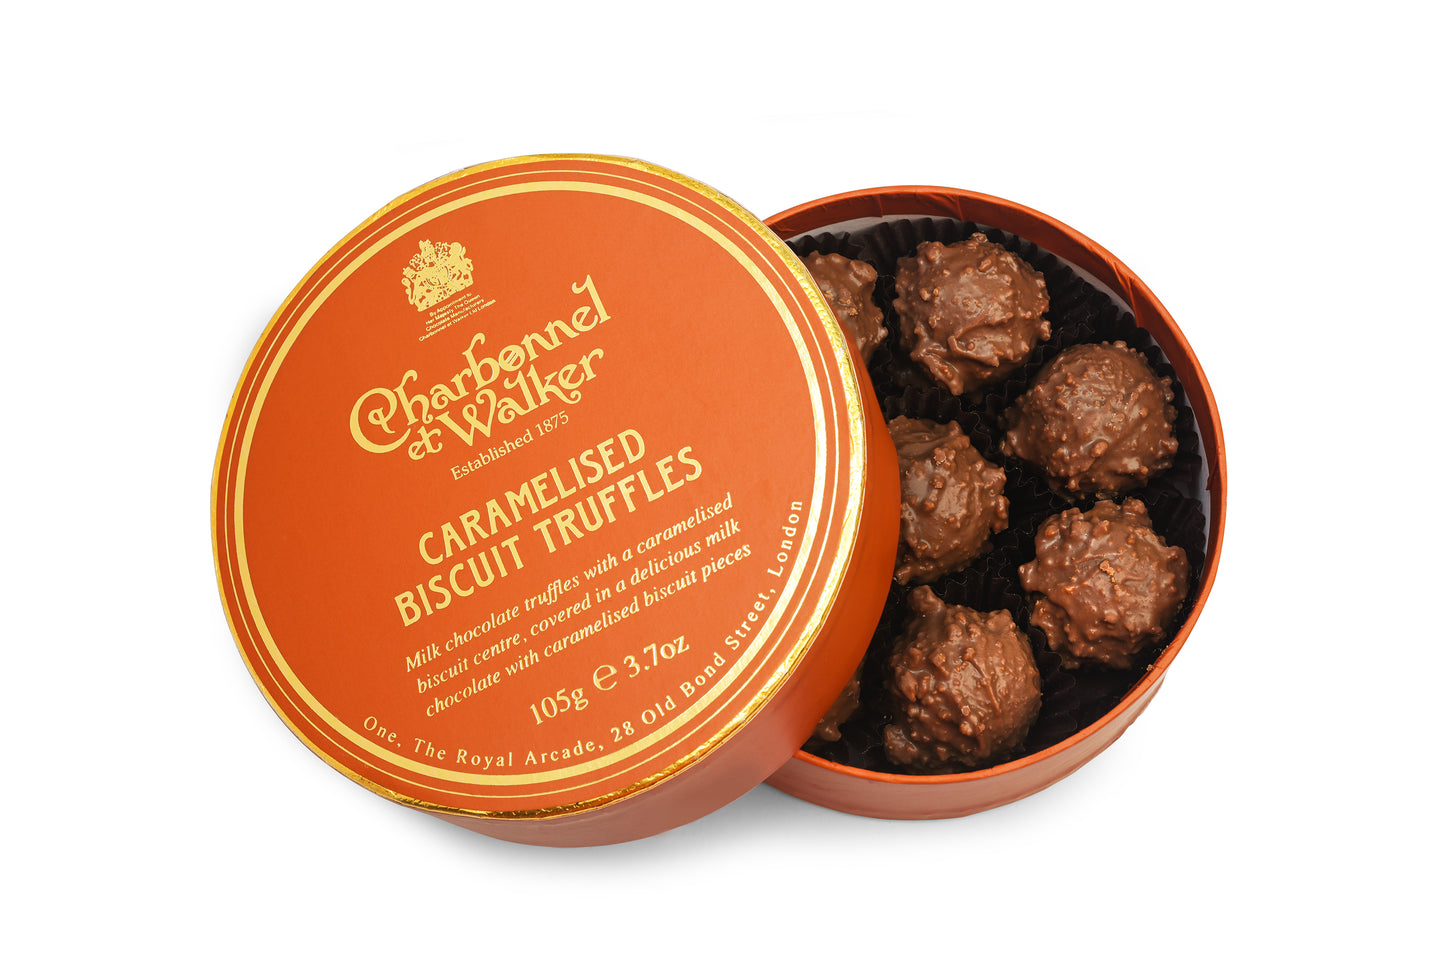 Caramelized Biscuit Truffles 105g